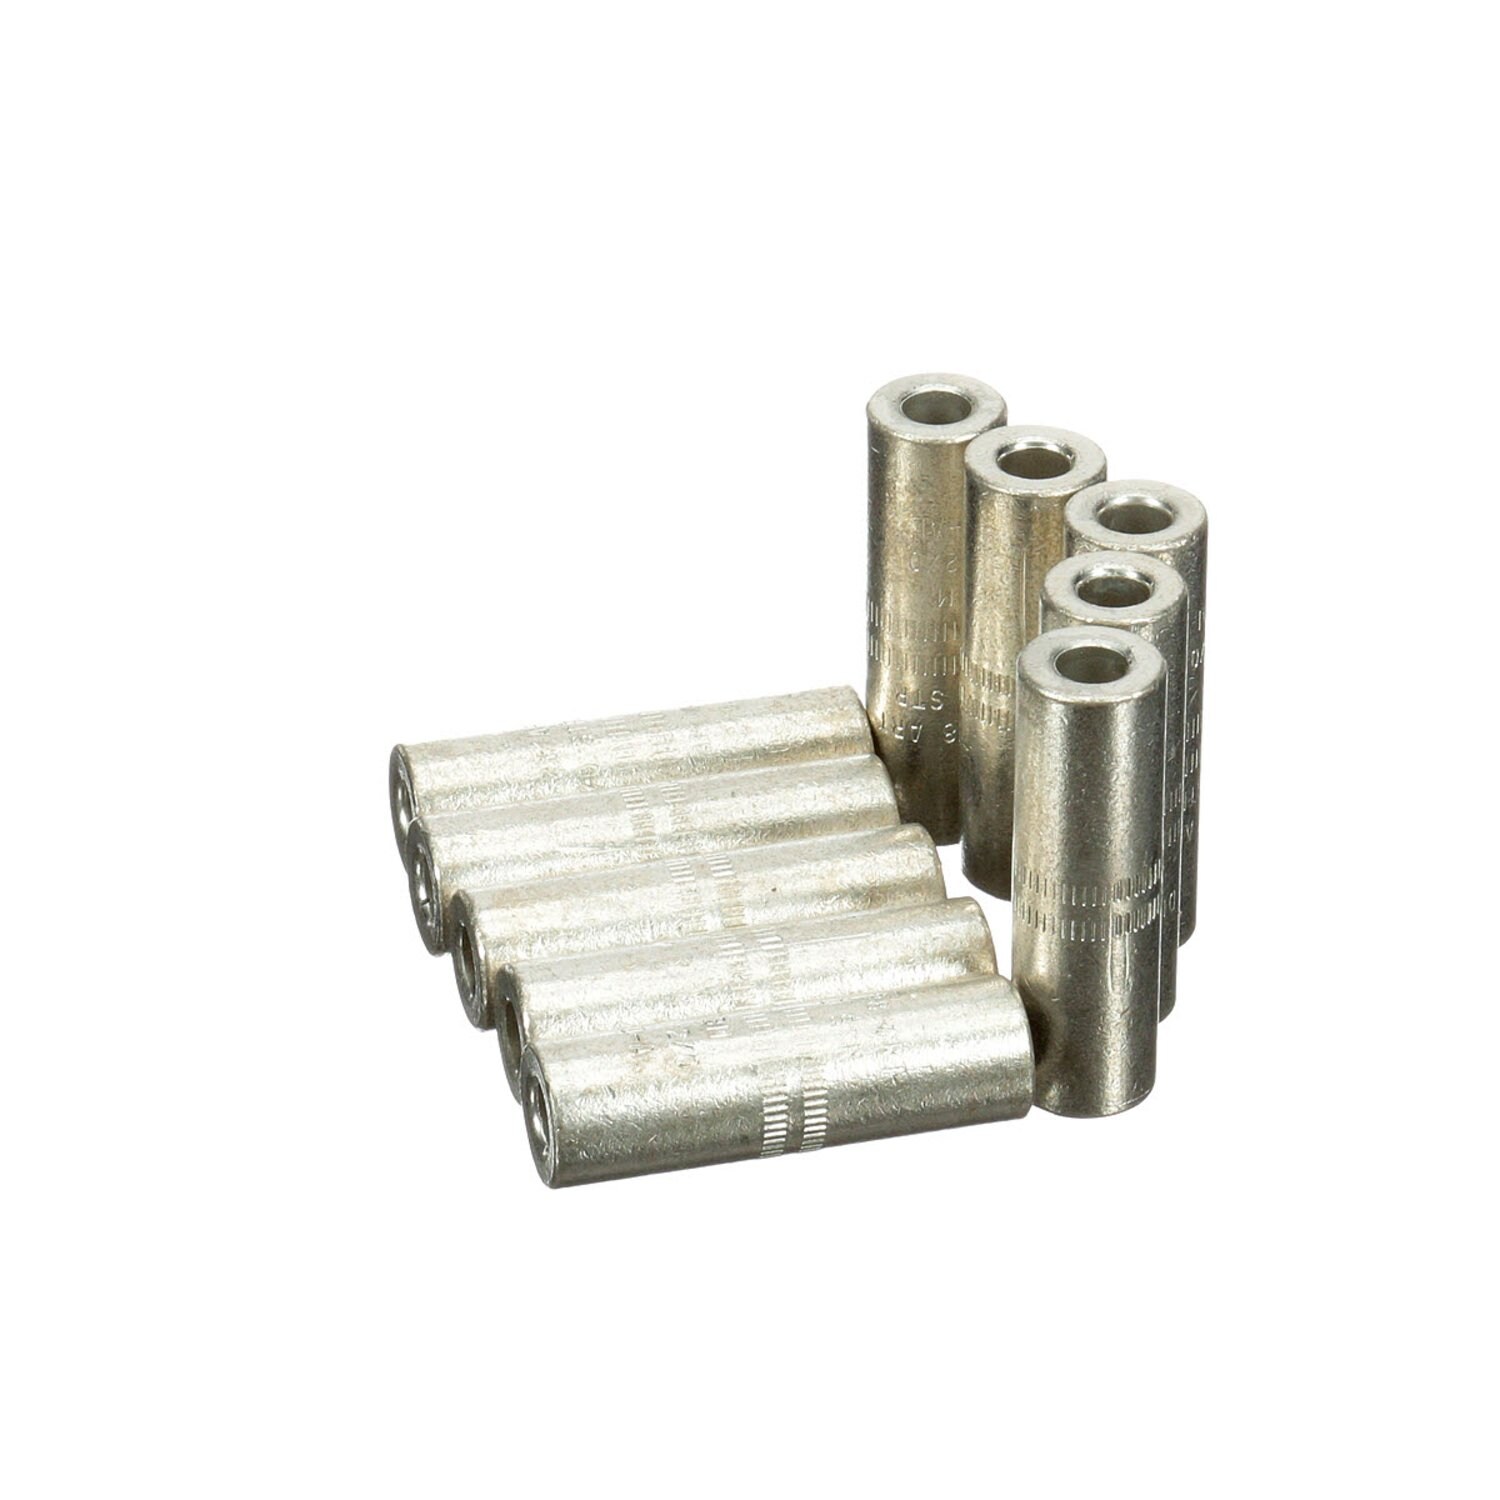 7000132220 - 3M Aluminum Connector CI-22, up to 35 kV, 4 AWG, 2 AWG Solid, Connector
O.D. 0.640 in (16,2 mm), 10/Case